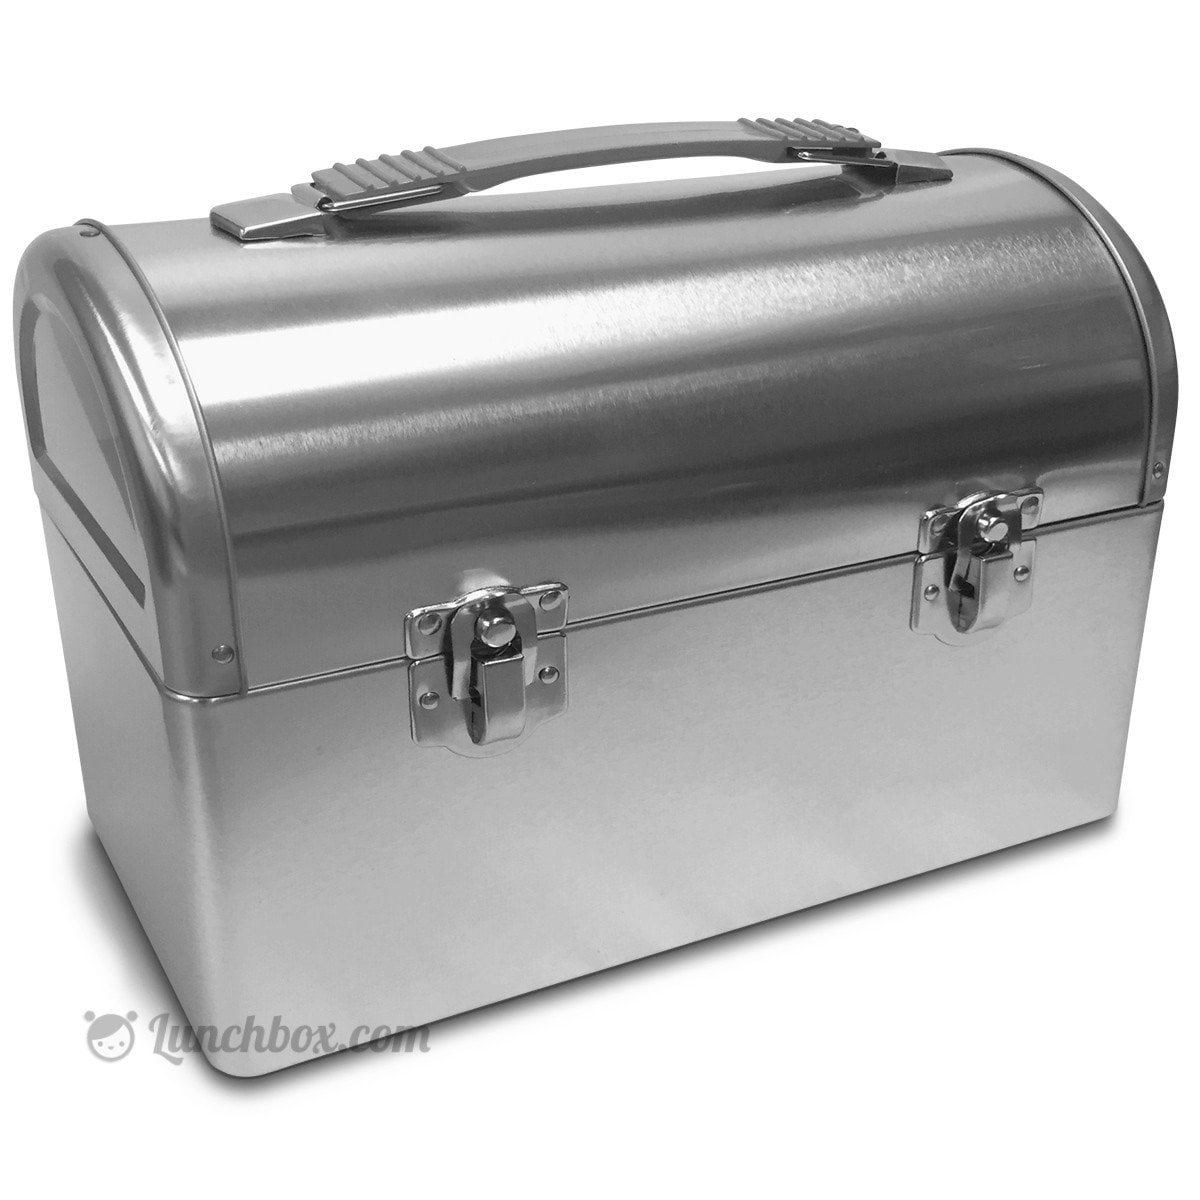 Minimal Stainless Steel Lunch Box 780 ml Set of 2 - Silver